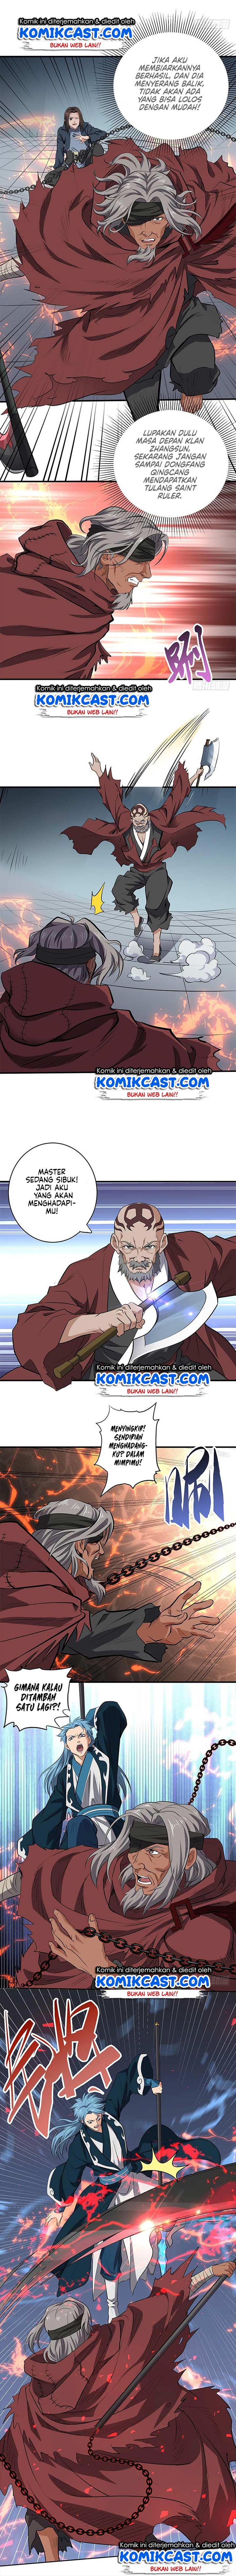 Chaotic Sword God Chapter 139